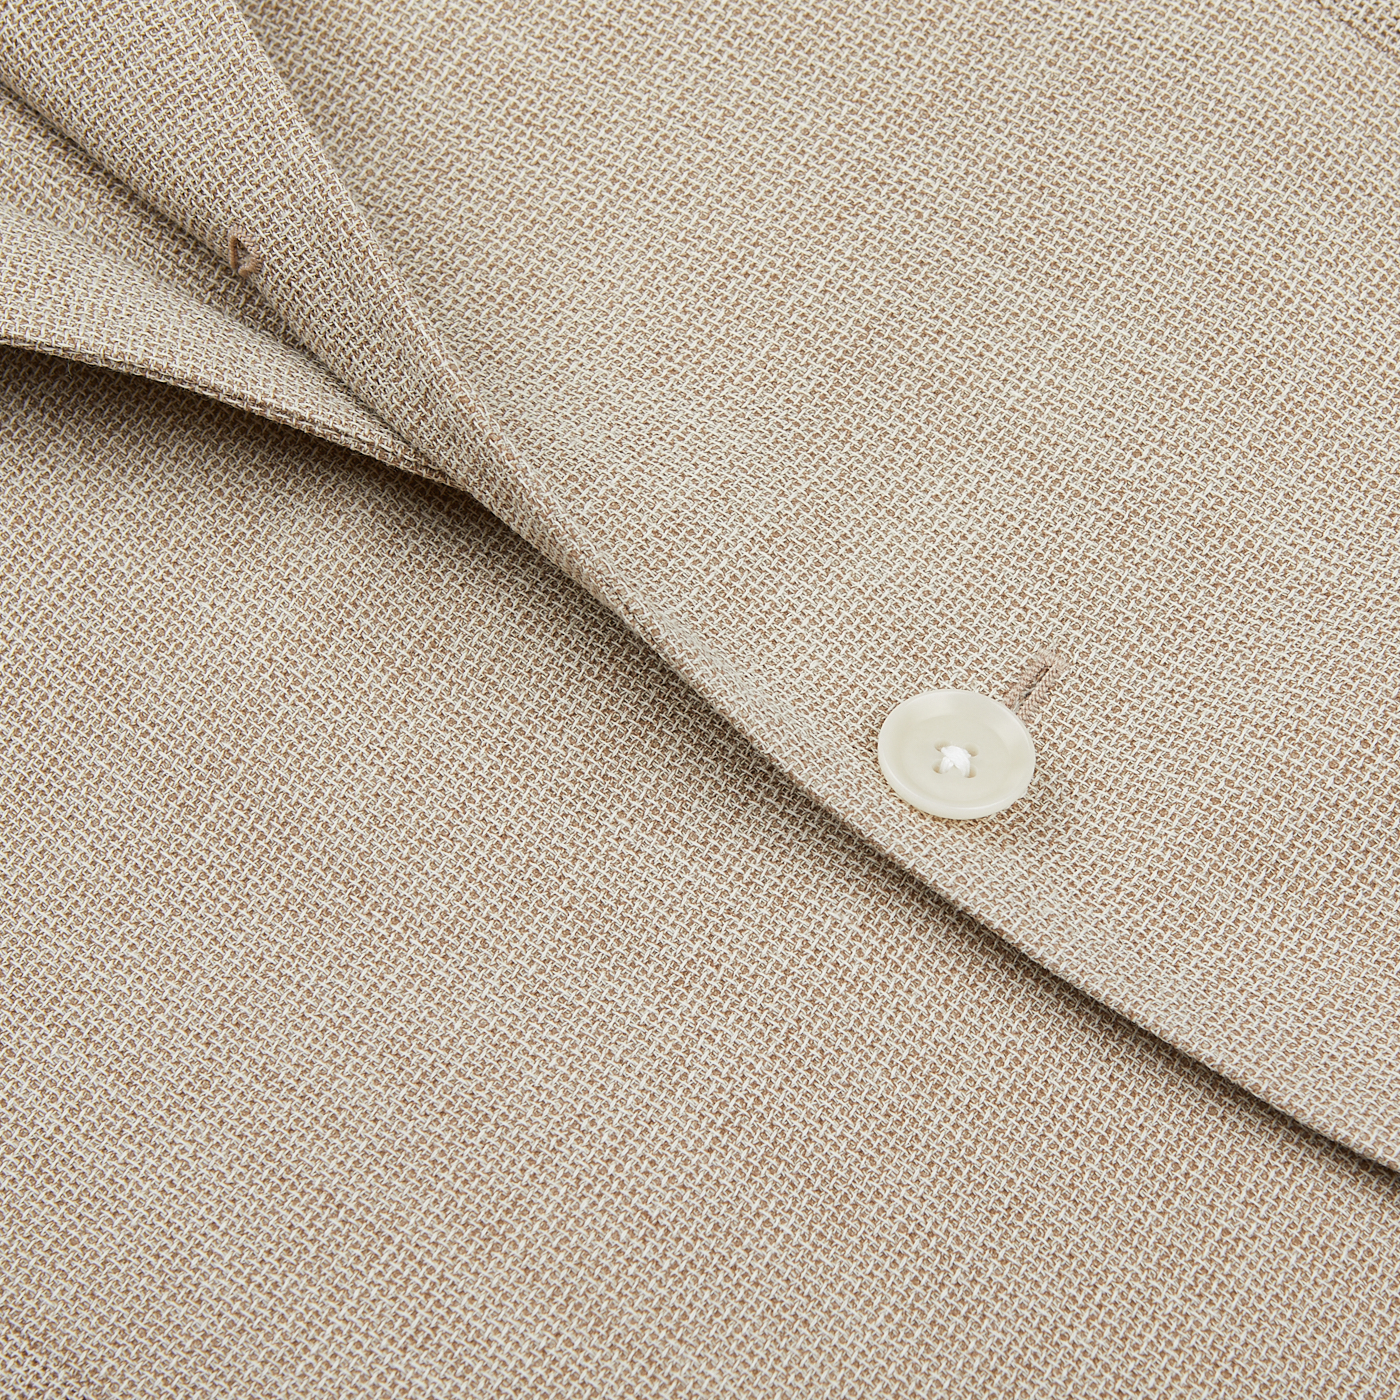 Close-up of a Ring Jacket Light Beige Wool Balloon Travel Blazer showing detailed texture with a focus on the collar and a button.